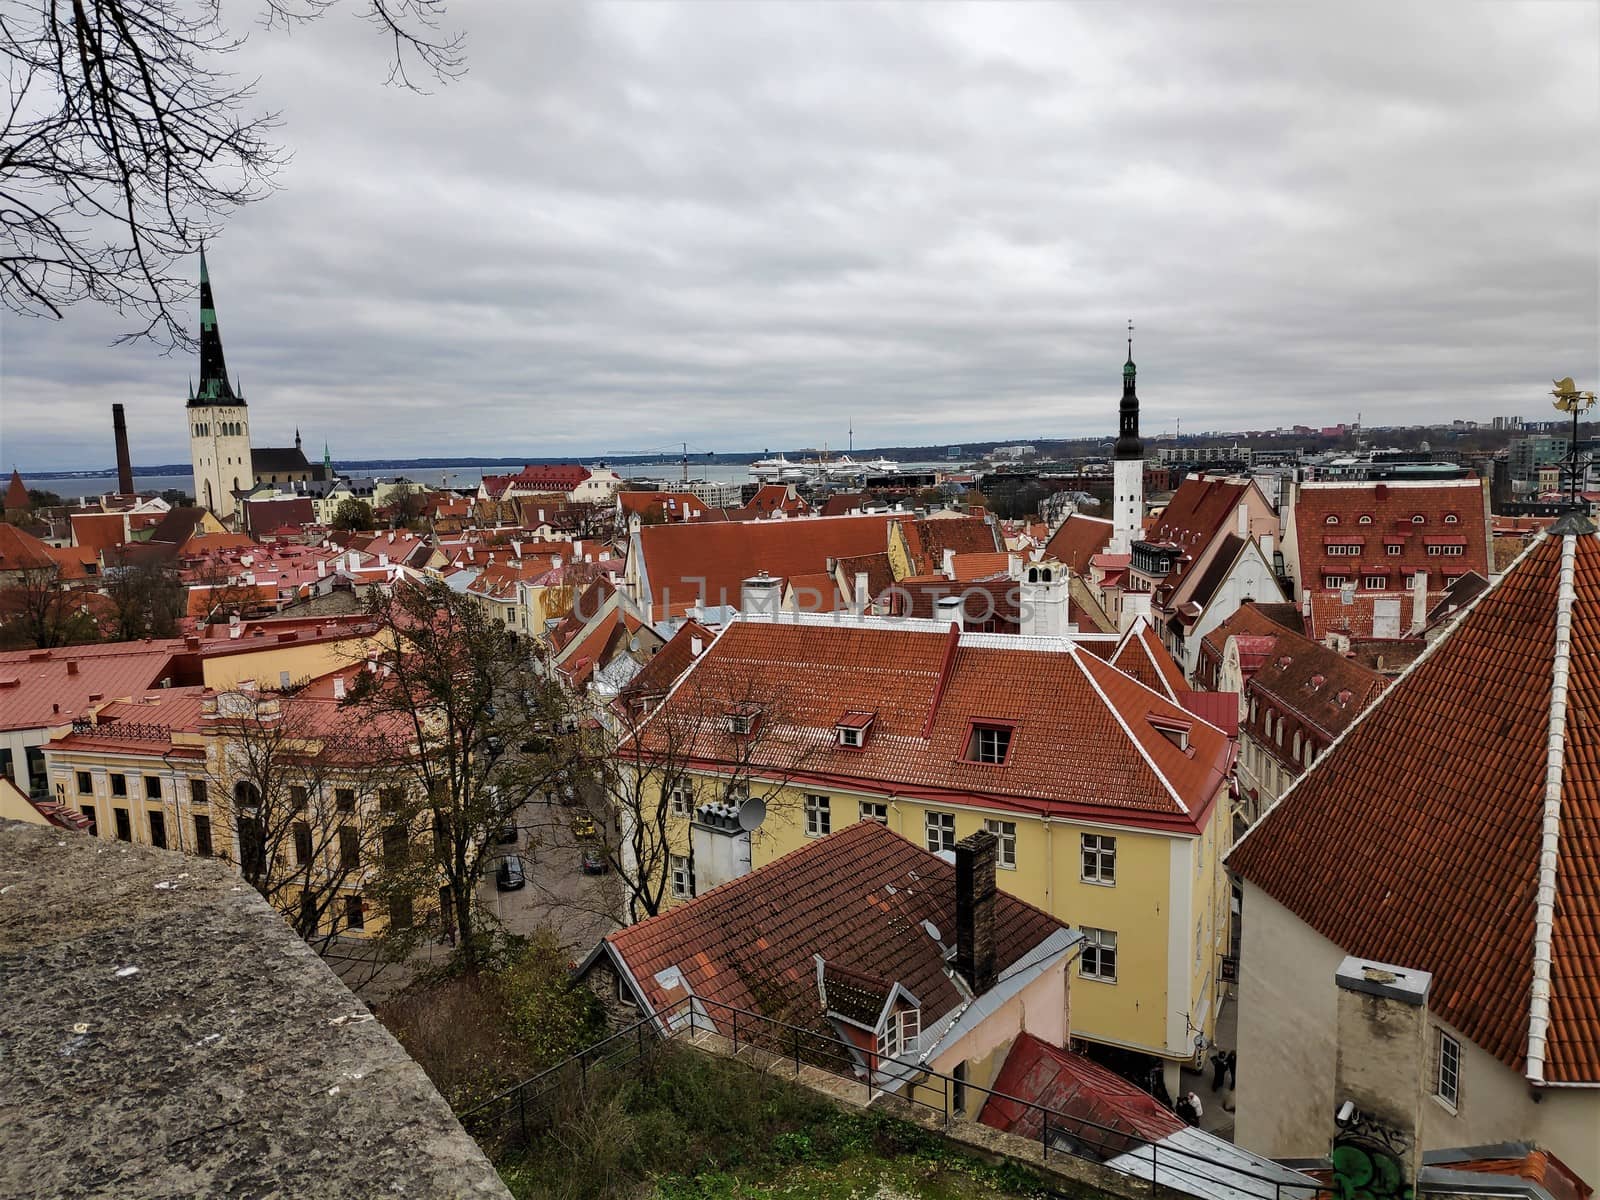 View from the Kohtuotsa platform over the old town of Tallinn to the Baltic Sea